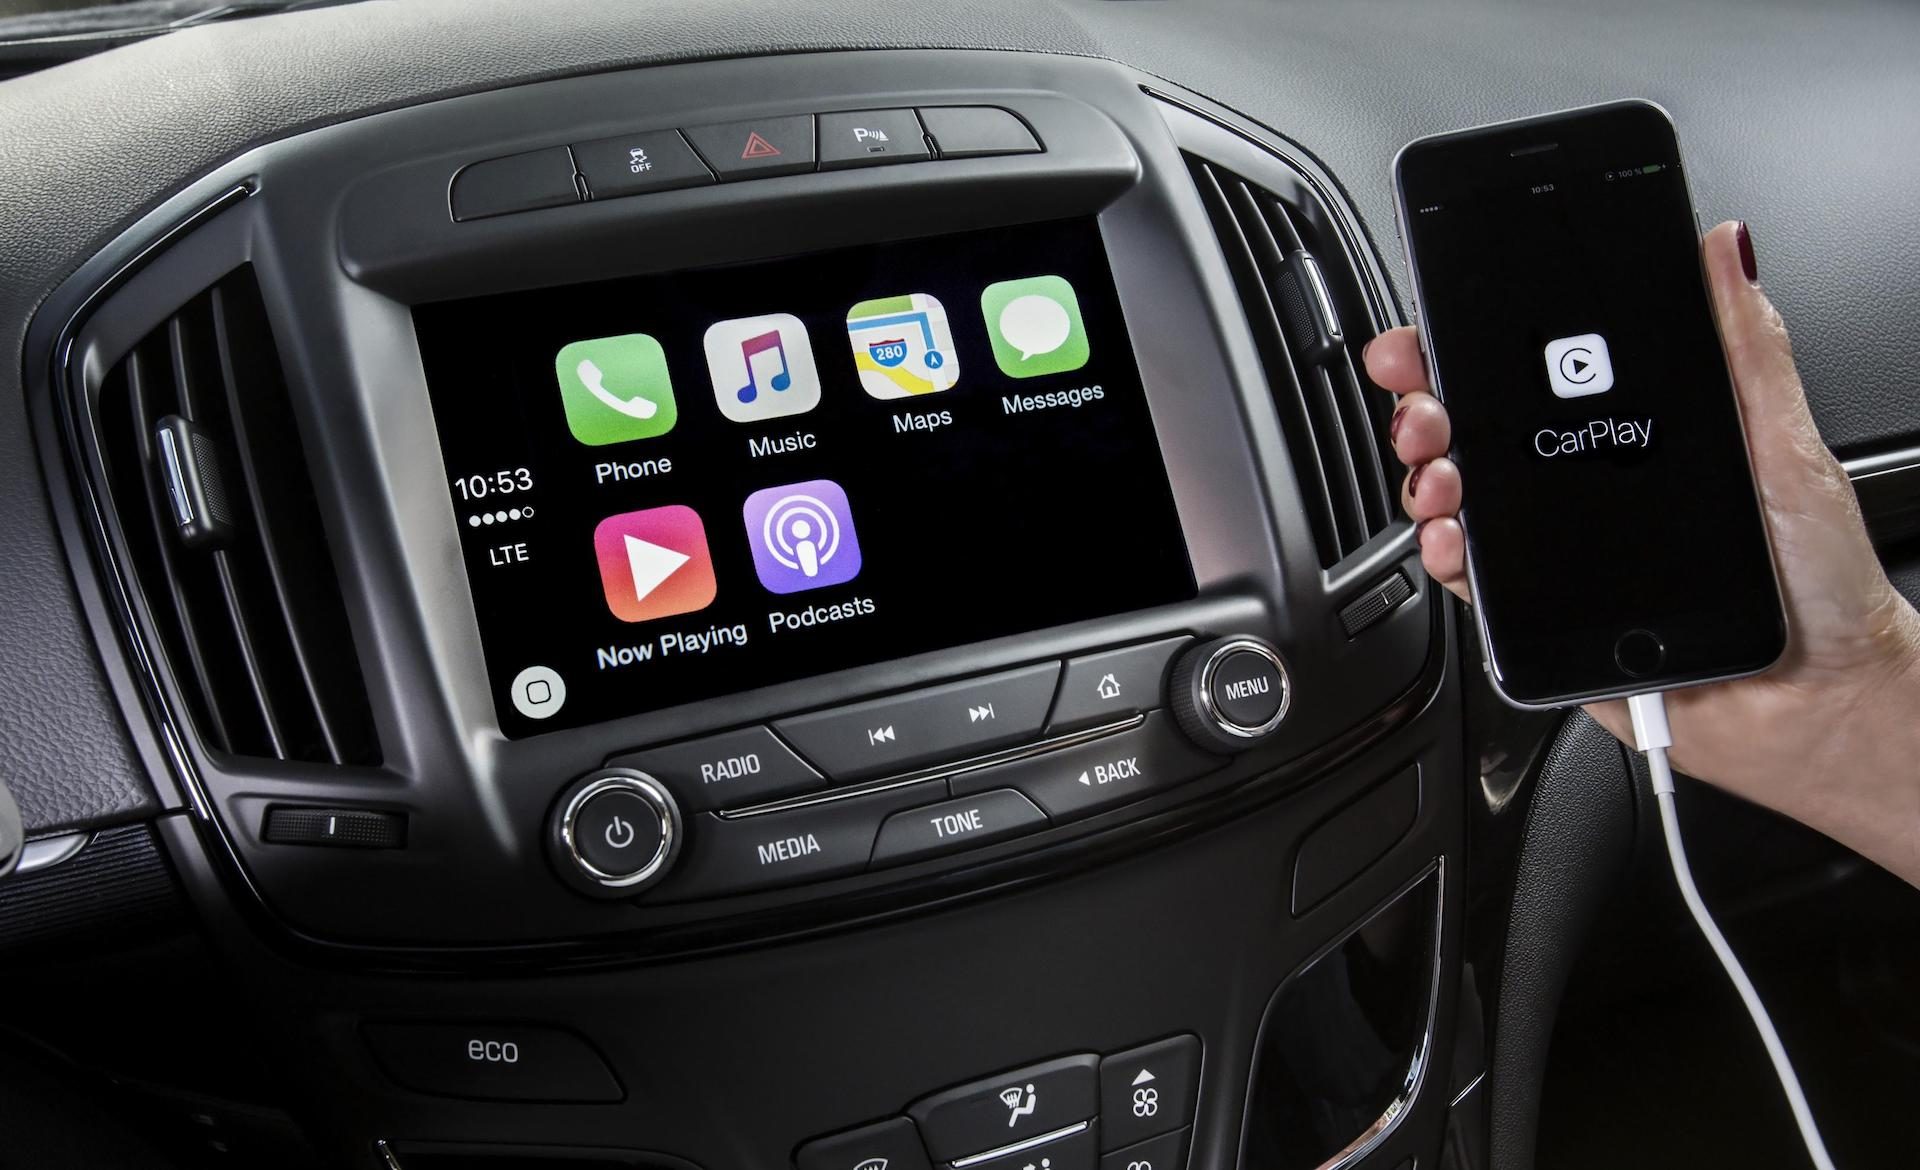 Apple CarPlay integrates your iPhone with your car